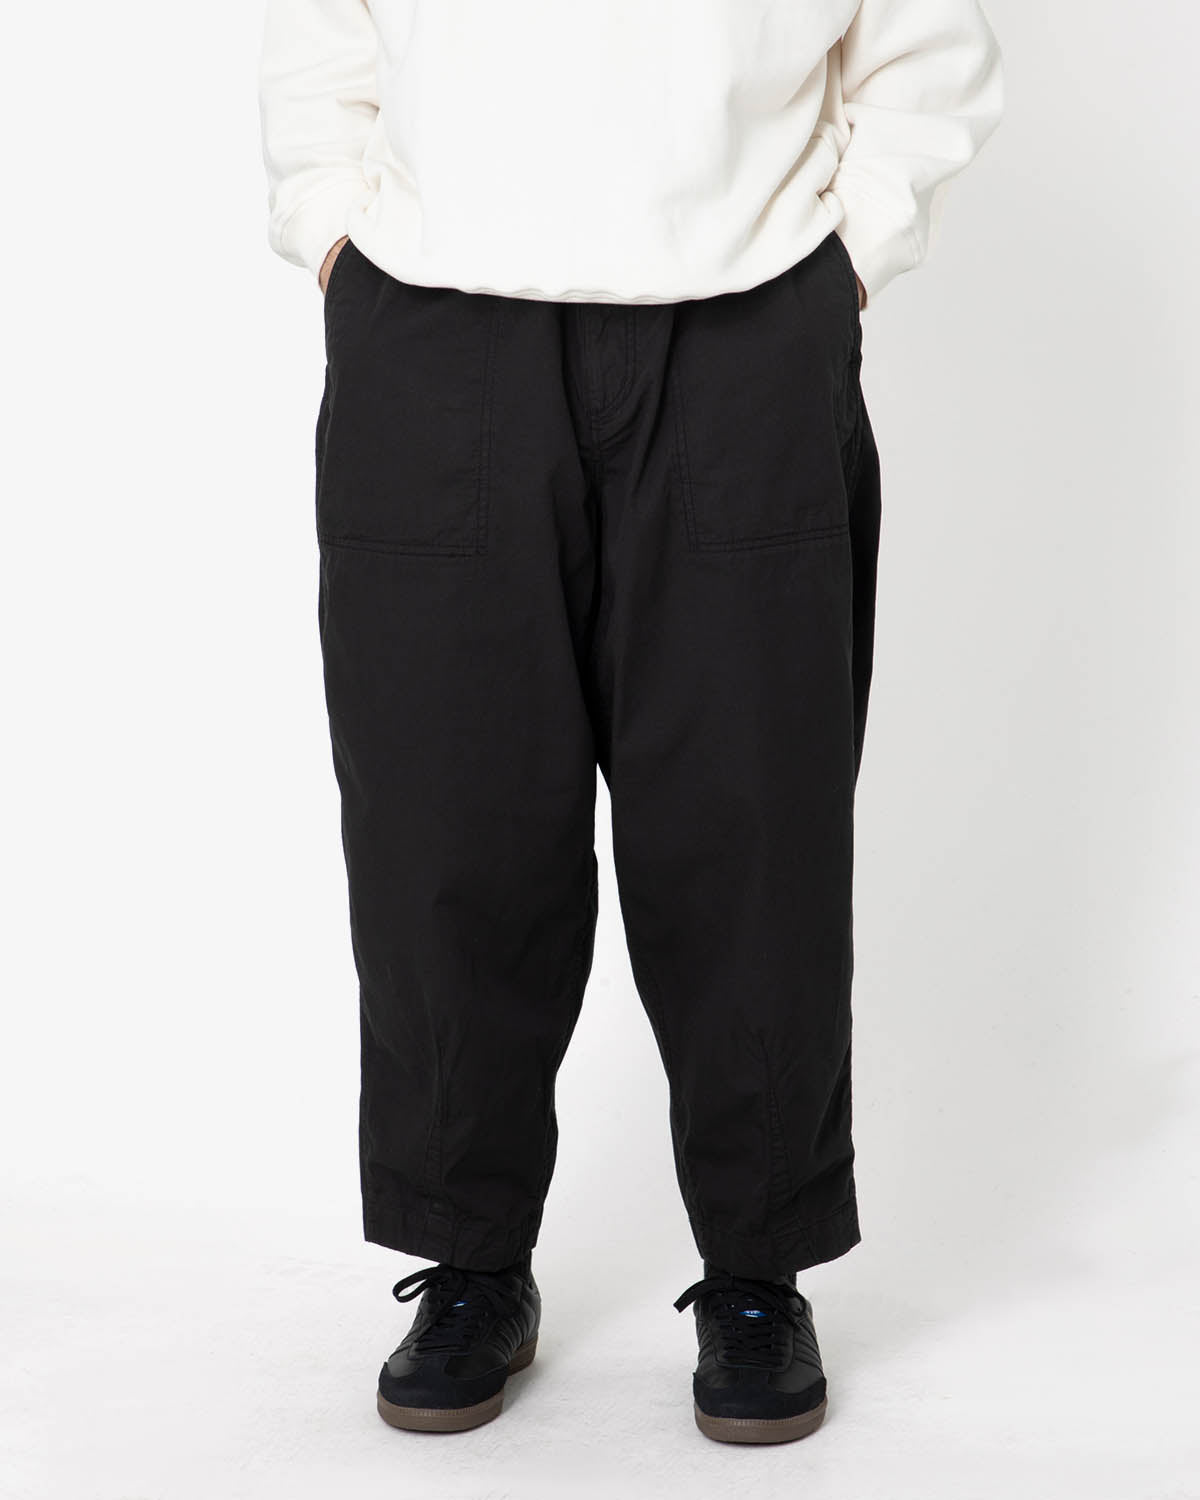 RIPSTOP WIDE CROPPED FIELD PANTS